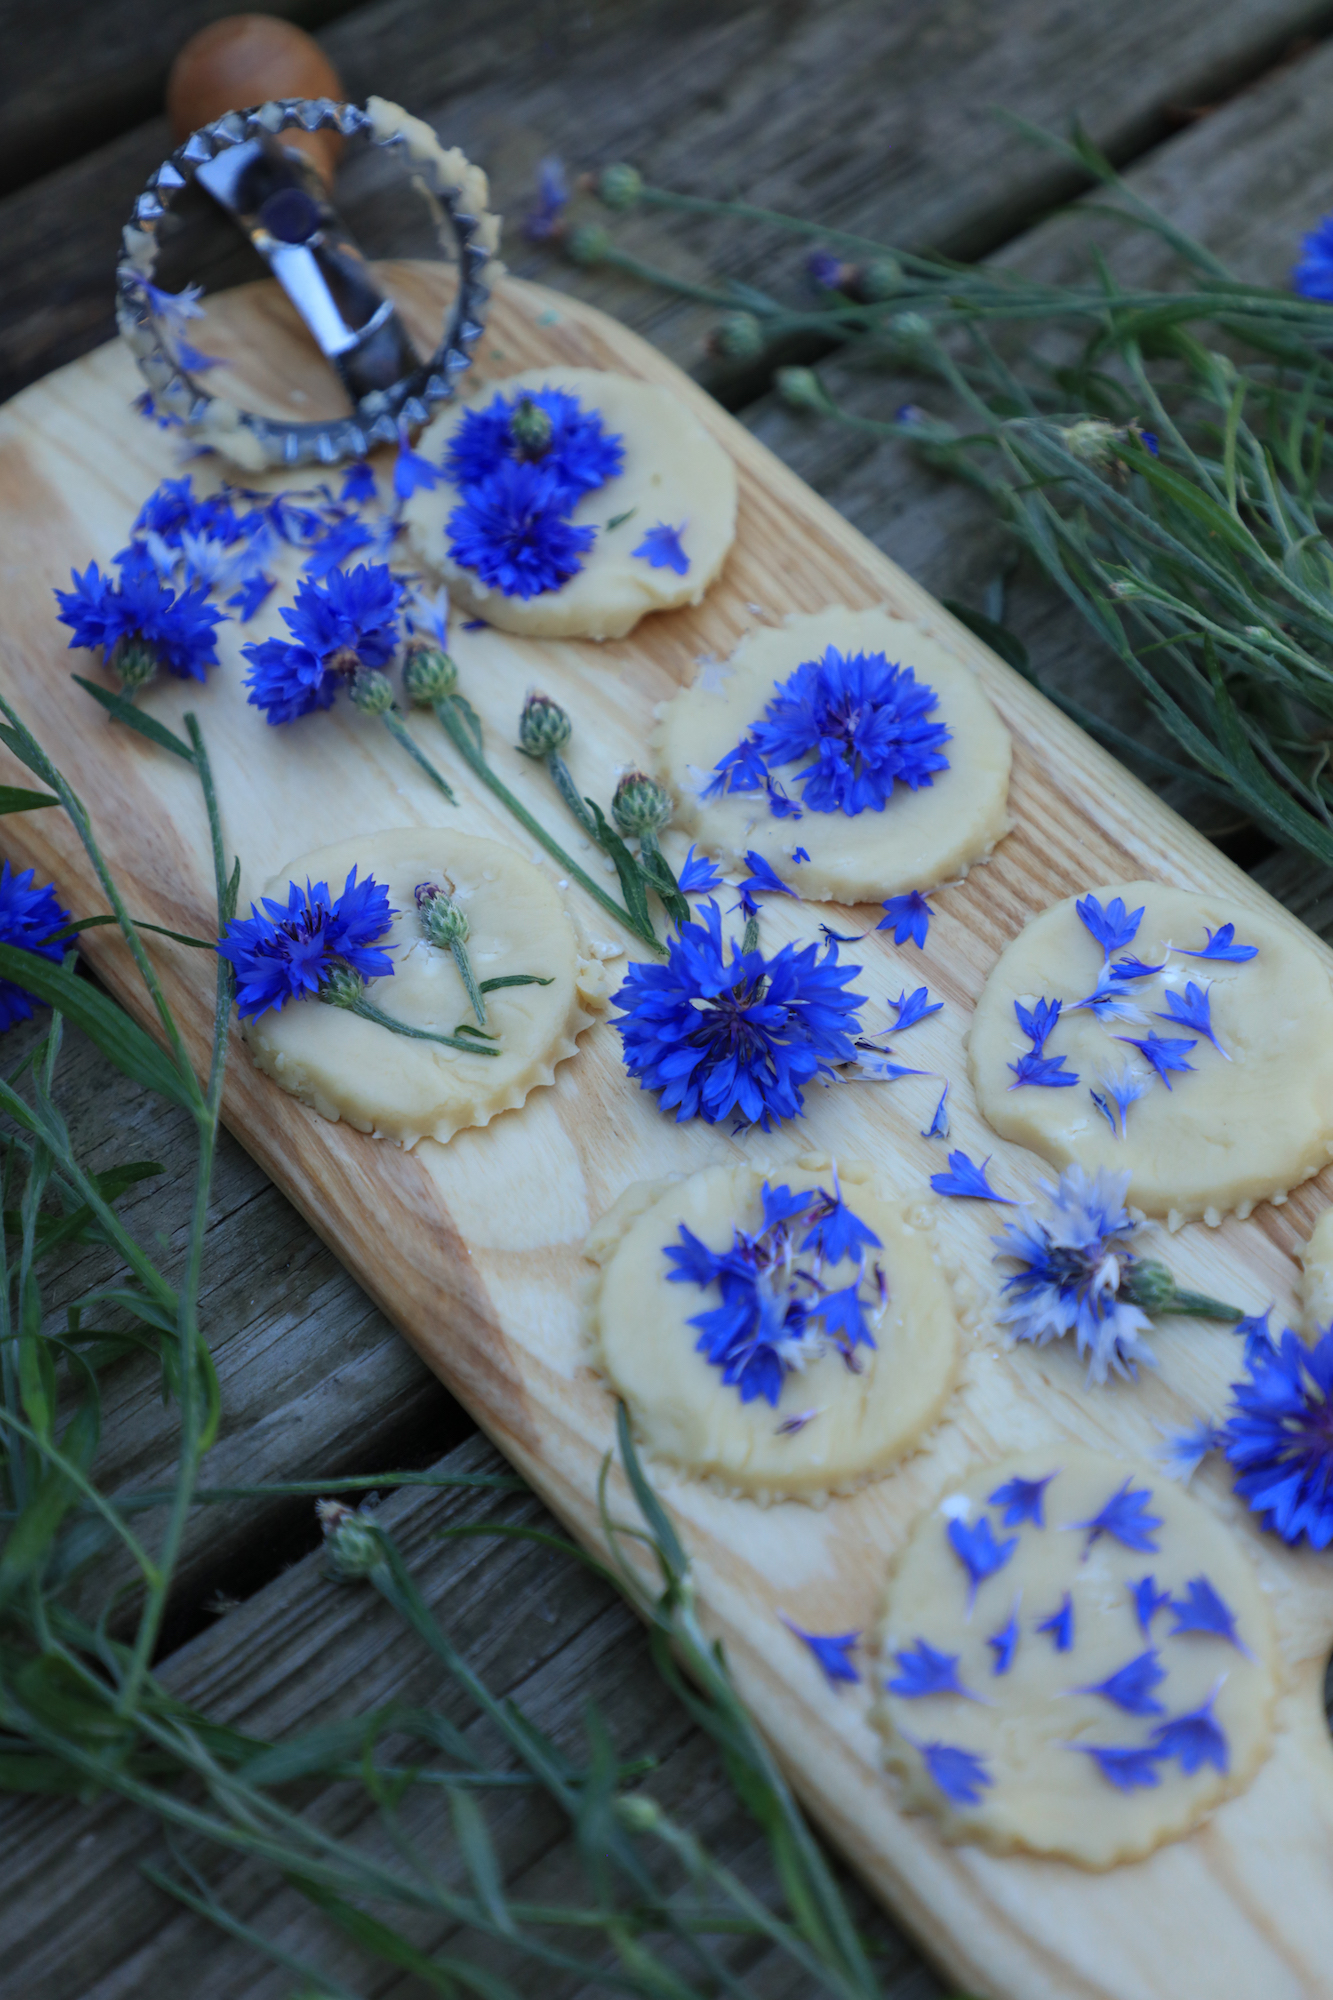 Cornflower shortbread ready for the oven